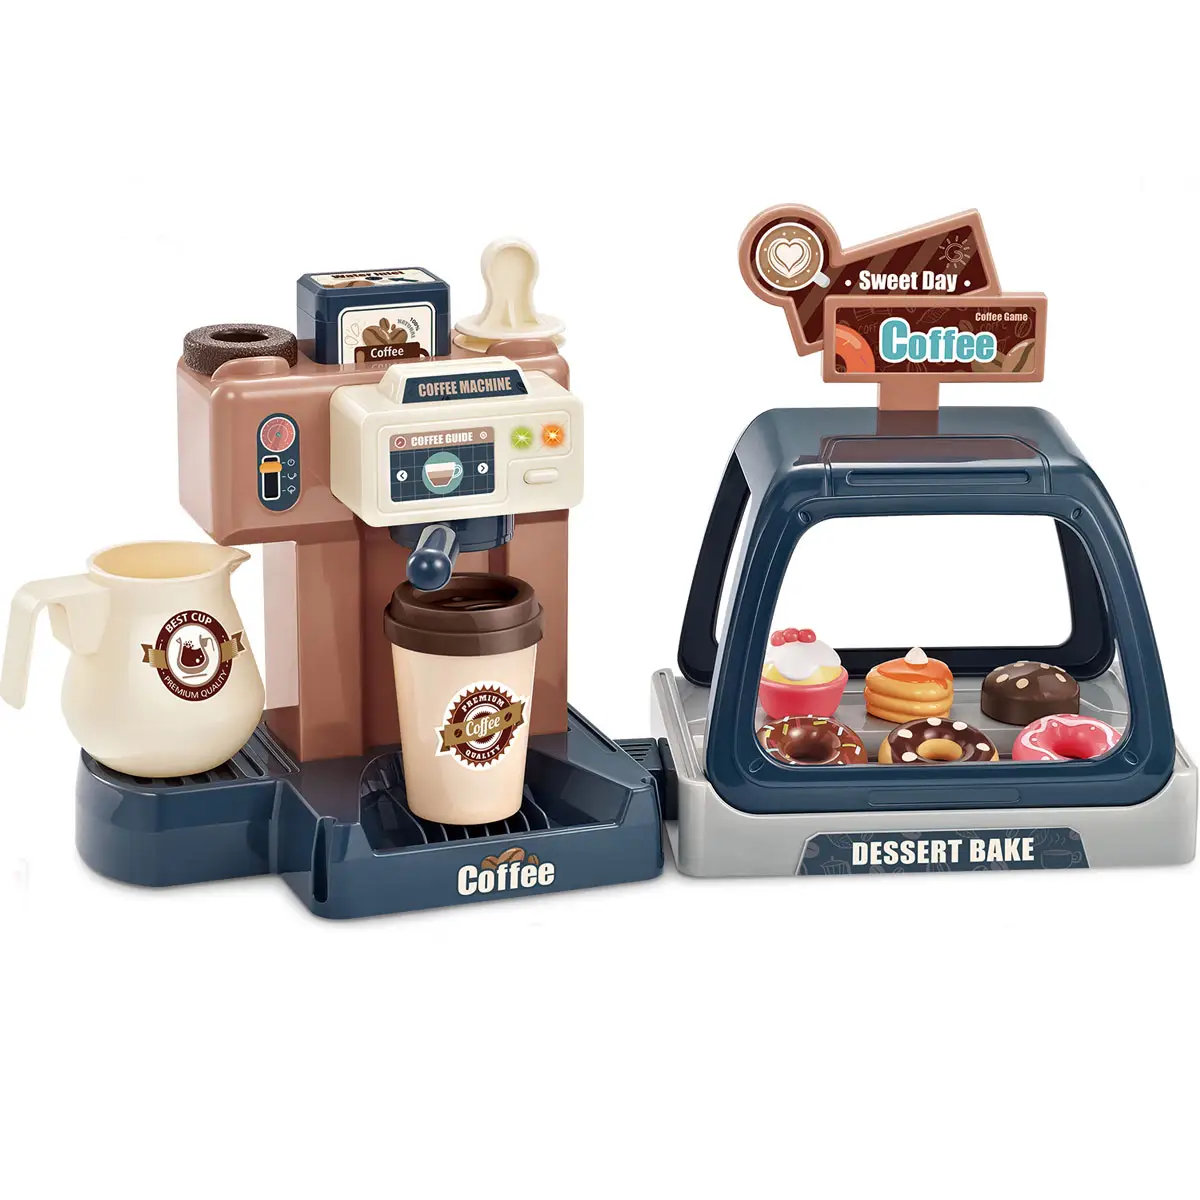 Realistic Shopping Set Coffee Machine with Lights and Sounds Pretend Play Kitchen Toy Pretend Play Food Set For Toddles And Kids